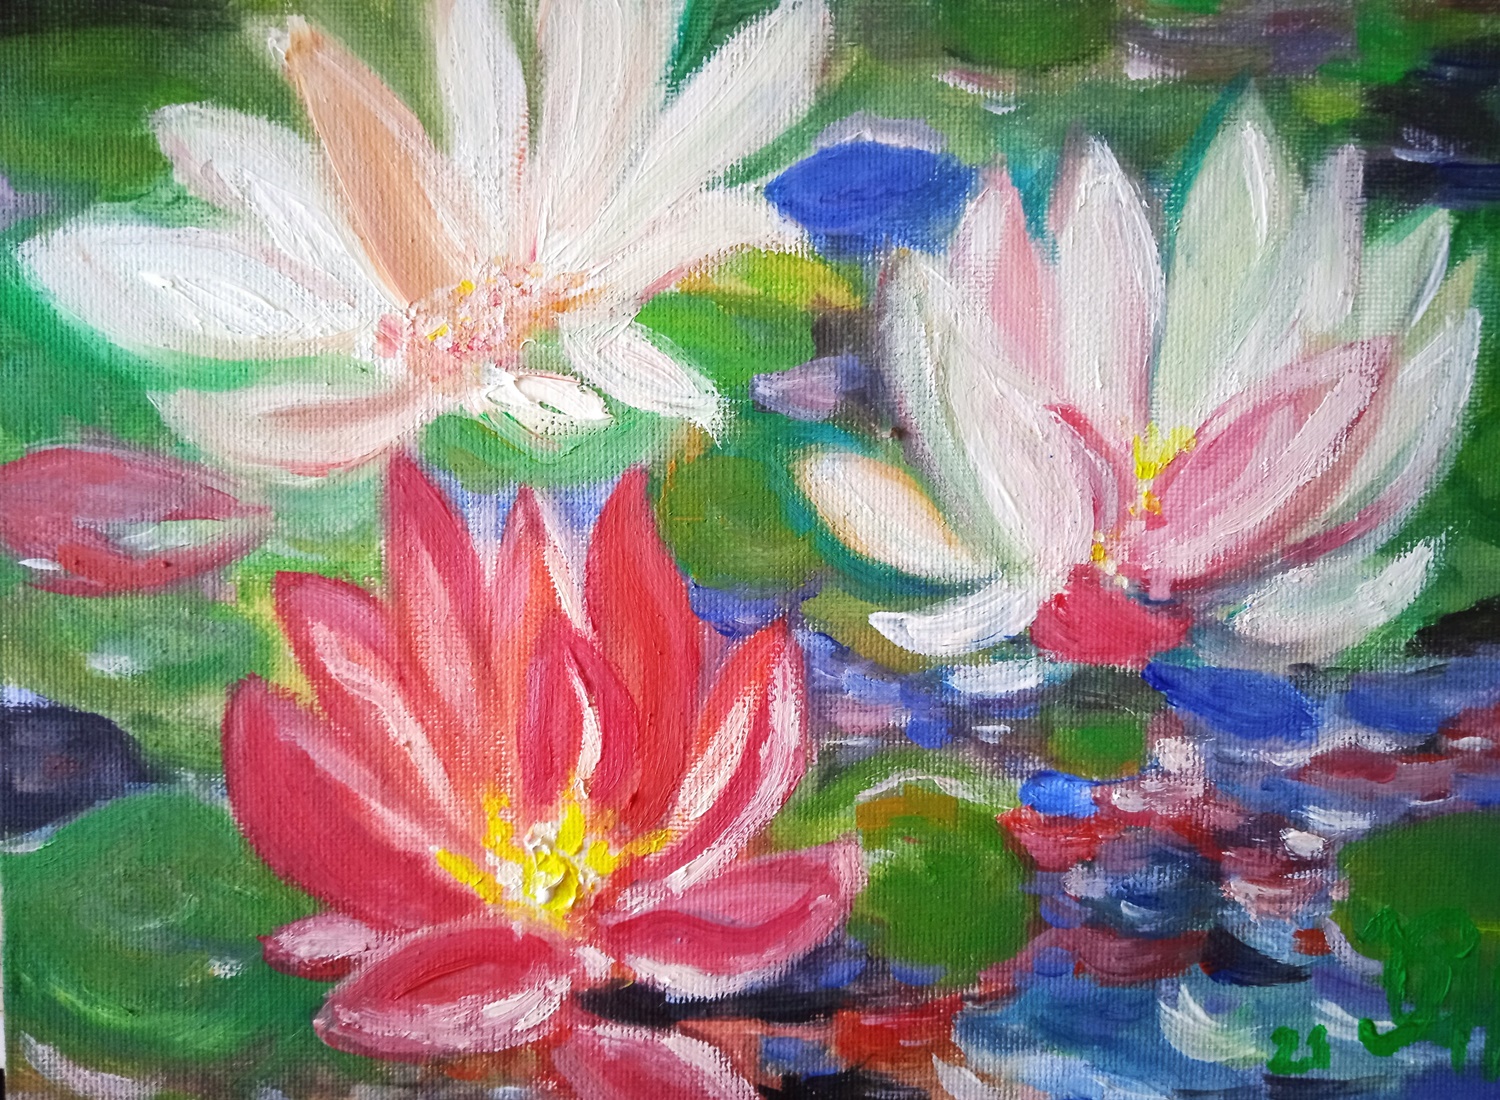 Painting Lillies